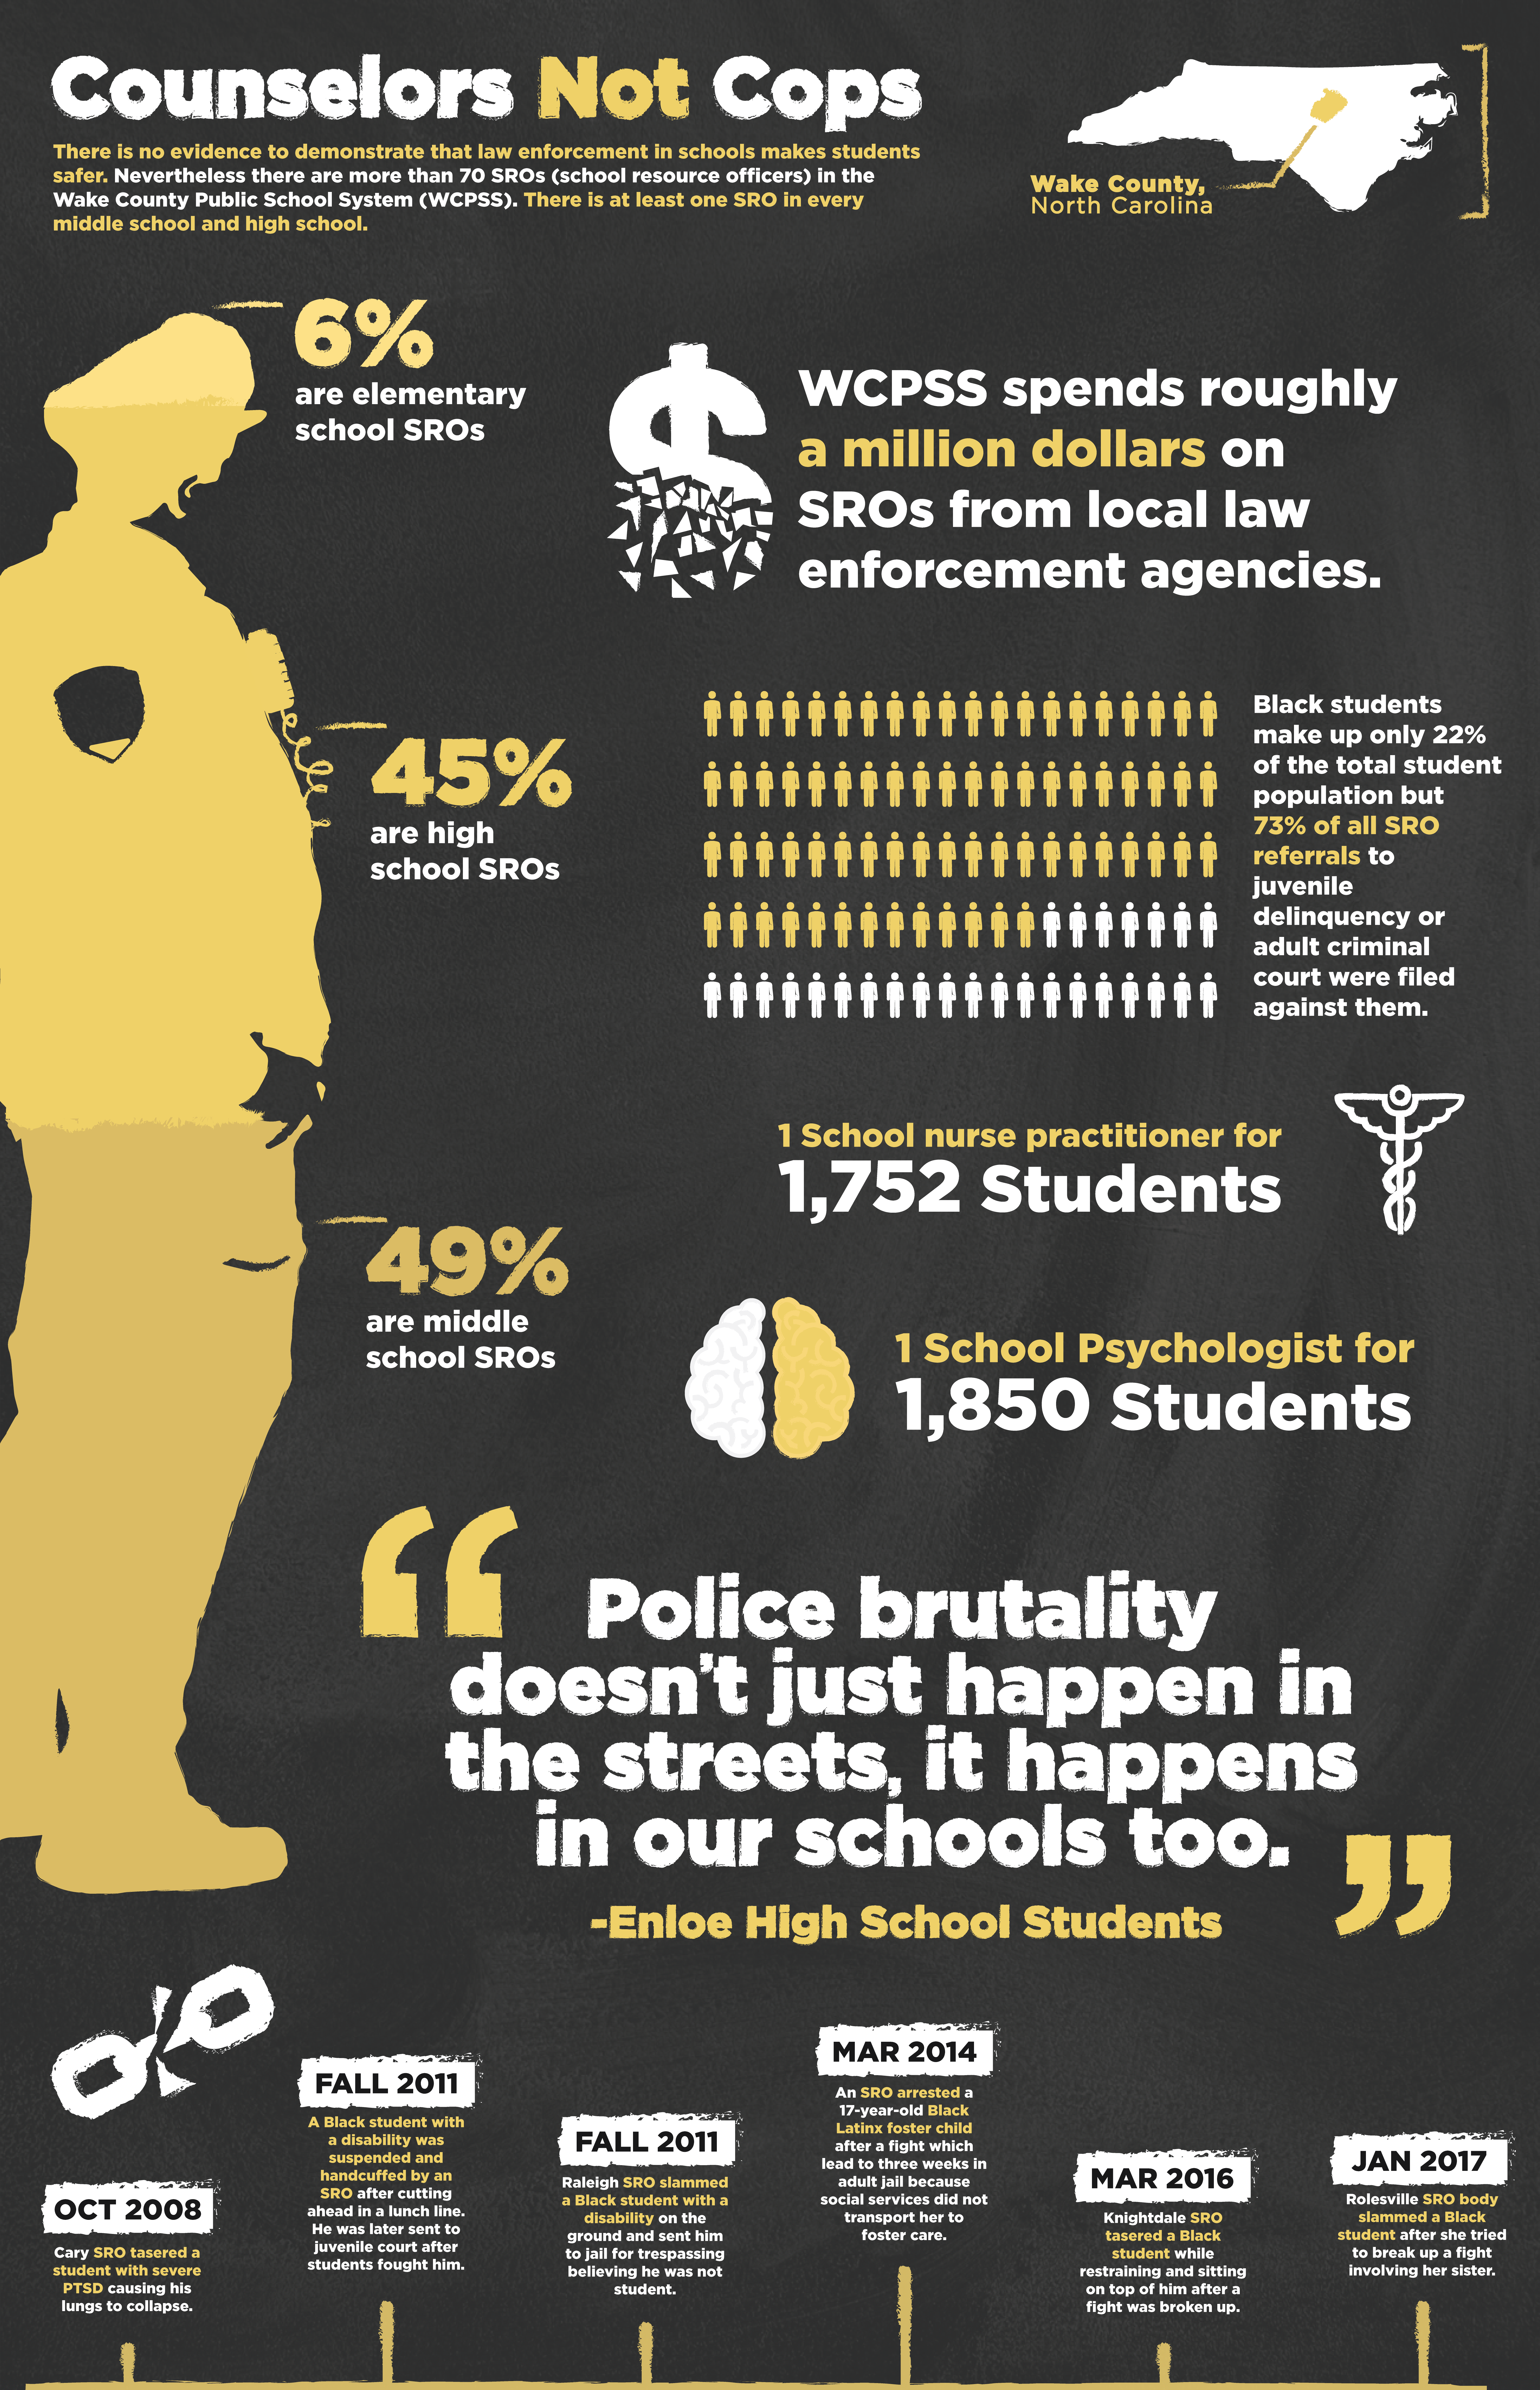 Large poster-size infographic reminiscent of a chalkboard named Counselors Not Cops with the state of North Carolina in white at the top with a yellow line pointing to Wake County. 

There is a police officer in yellow on the left as a bar graph showing the percentage of SROs in Wake County Schools. 49% of police officers or school resource officers (SROs) are in middle school, 45% are in high school, and 6% are in middle school. 

On the right, there is a money sign that shatters like glass. Next to this money sign is text that says WCPSS spends roughly a million dollars on SROs from local law enforcement agences.

Below, there are a 100 people icons with 73 colored yellow to represent that Black students make up 73% of SRO referrals to juvenile and adult court despite being only 22% of student enrollment.

Below this is a stat that says there is one school nurse for 1,752 students (medical icon on the right) and 1 school psychologist for 1,850 students. (brain icon with the right brain in yellow).

Below this is a quote in large text: "Police brutality doesn't just happen in the streets, it happens in our schools too." - Enloe High School Students

At the very bottom is a timeline showing police brutality events in Wake County schools beginning in October 2008 and ending in January 2017.  

